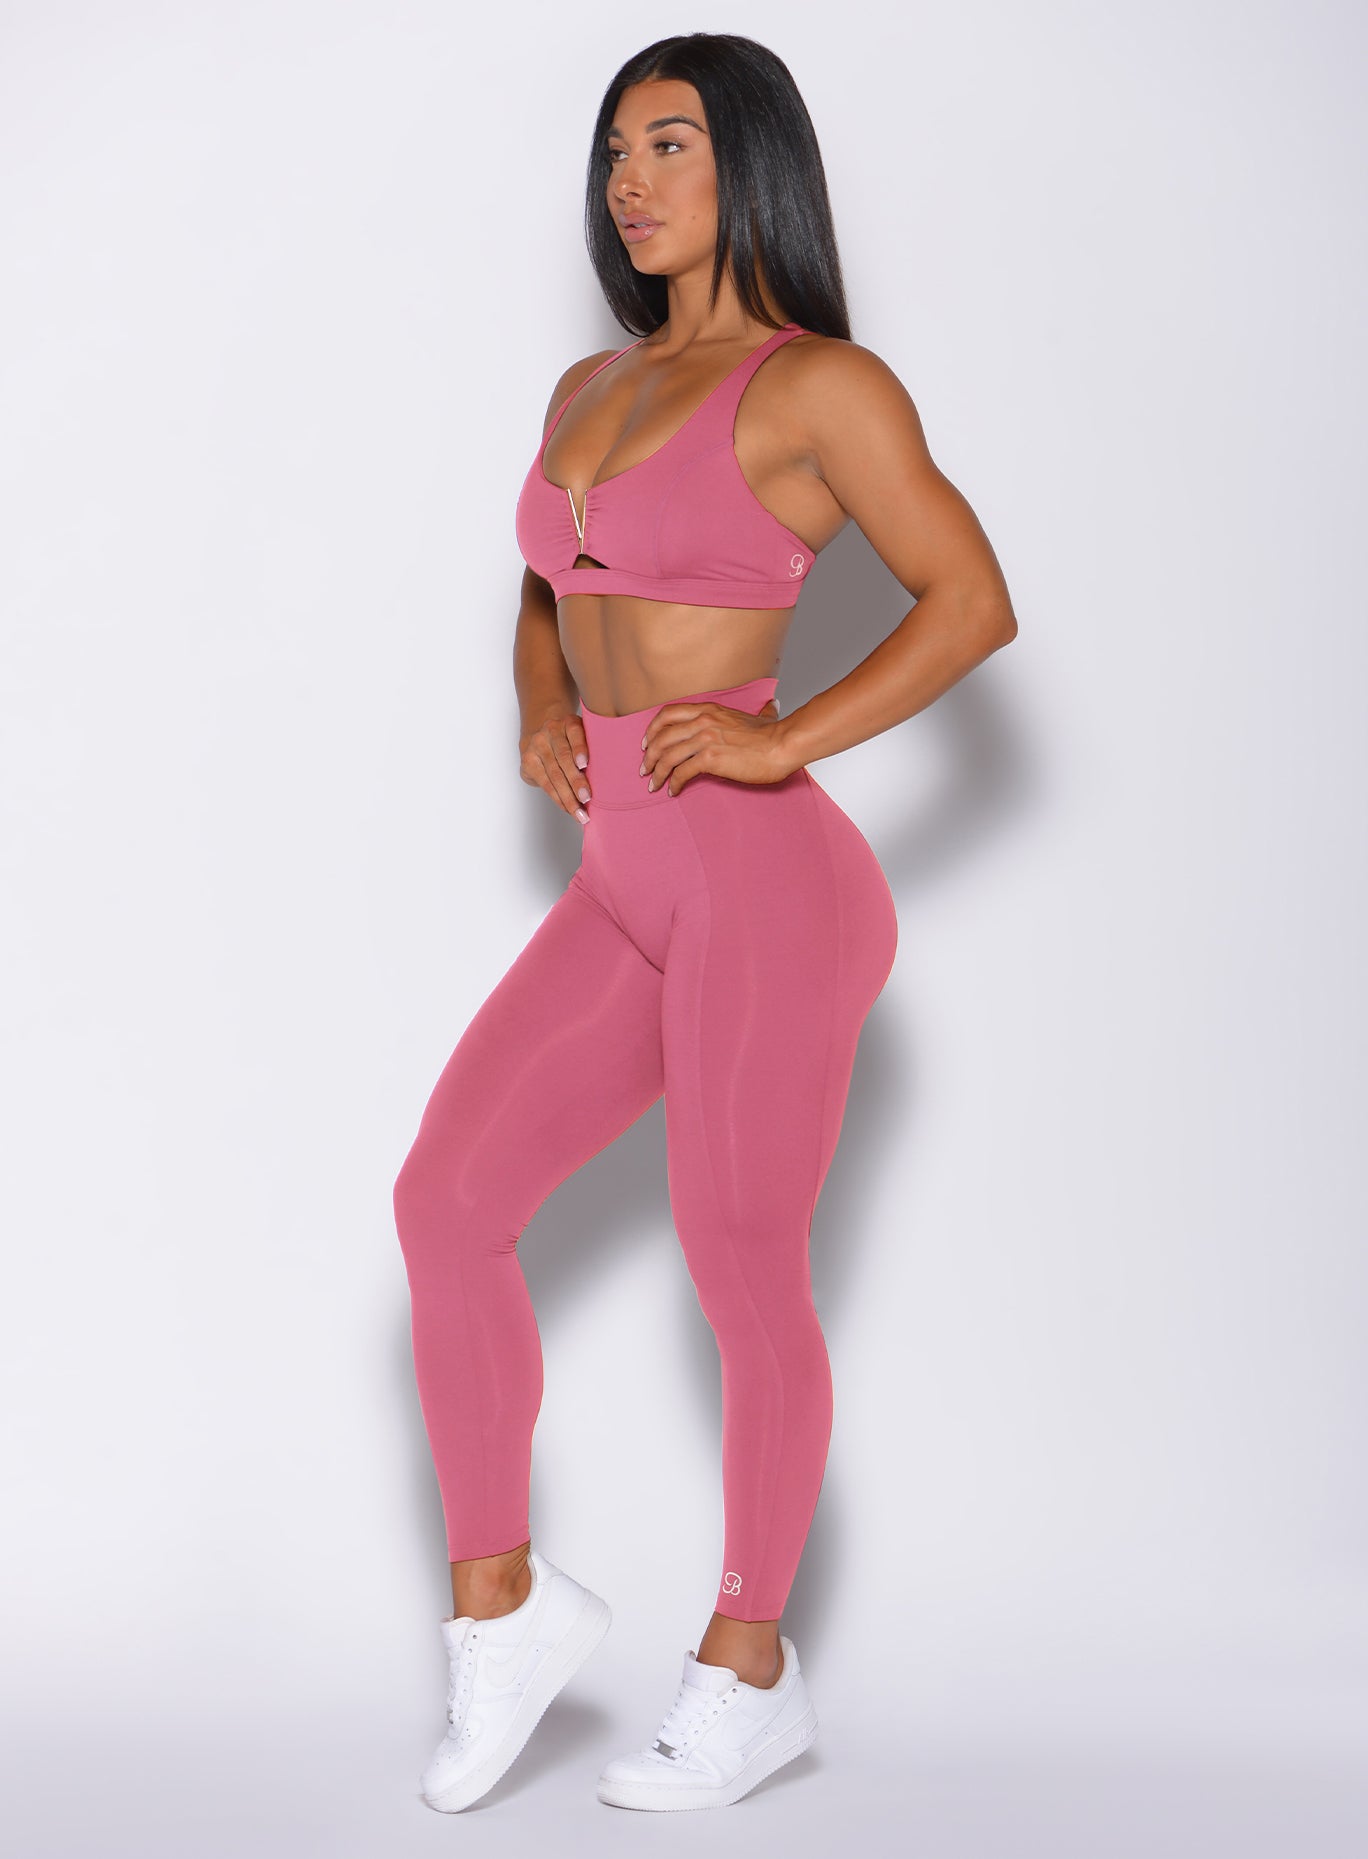 Left side profile view of a model in our victory scrunch leggings in blush color and a matching sports bra